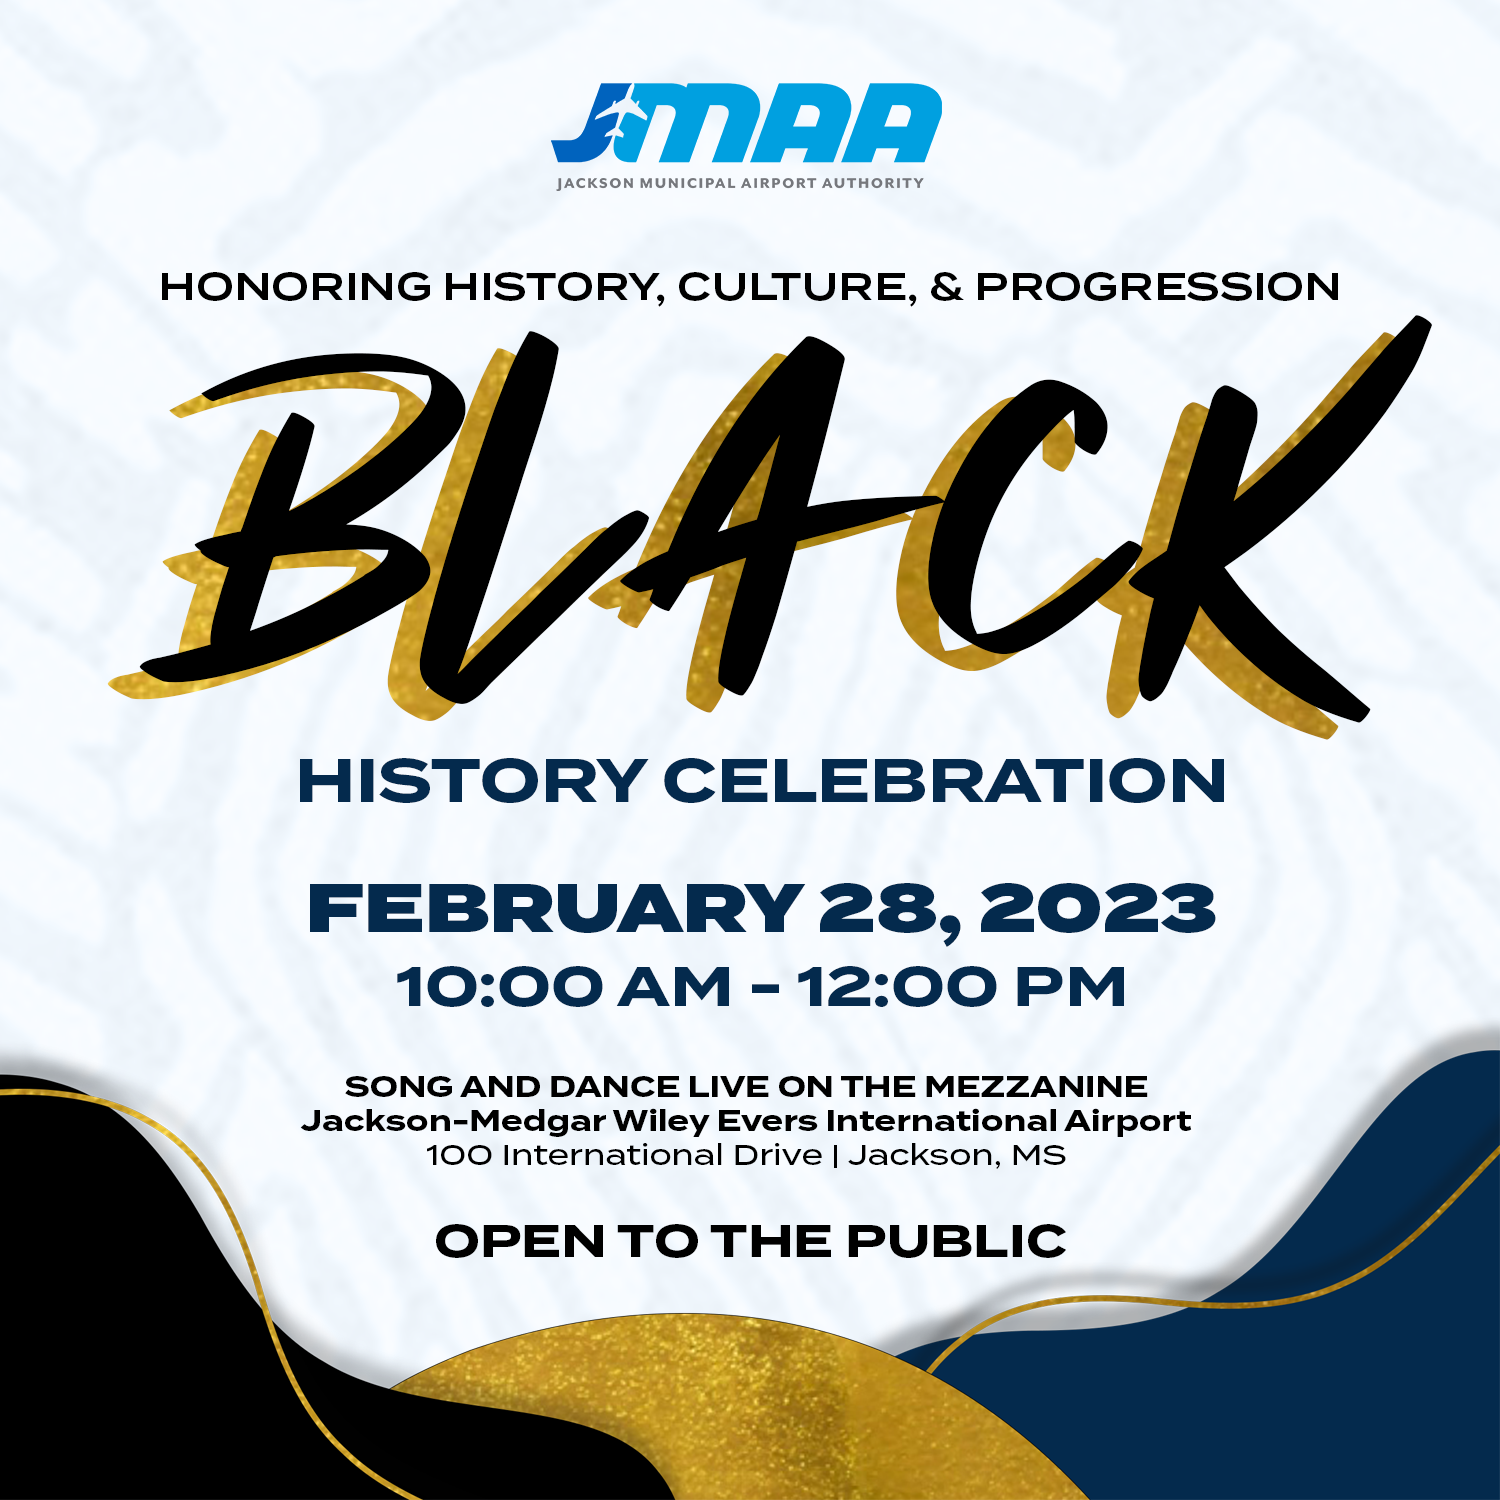 Jackson Municipal Airport Authority Announces Black History Month Celebration: Honoring History, Culture, and Progression at JAN; Featuring JPS School Choirs, Alkebulan Music Philosophy, and Keynote Speaker, Pamela D.C. Junior